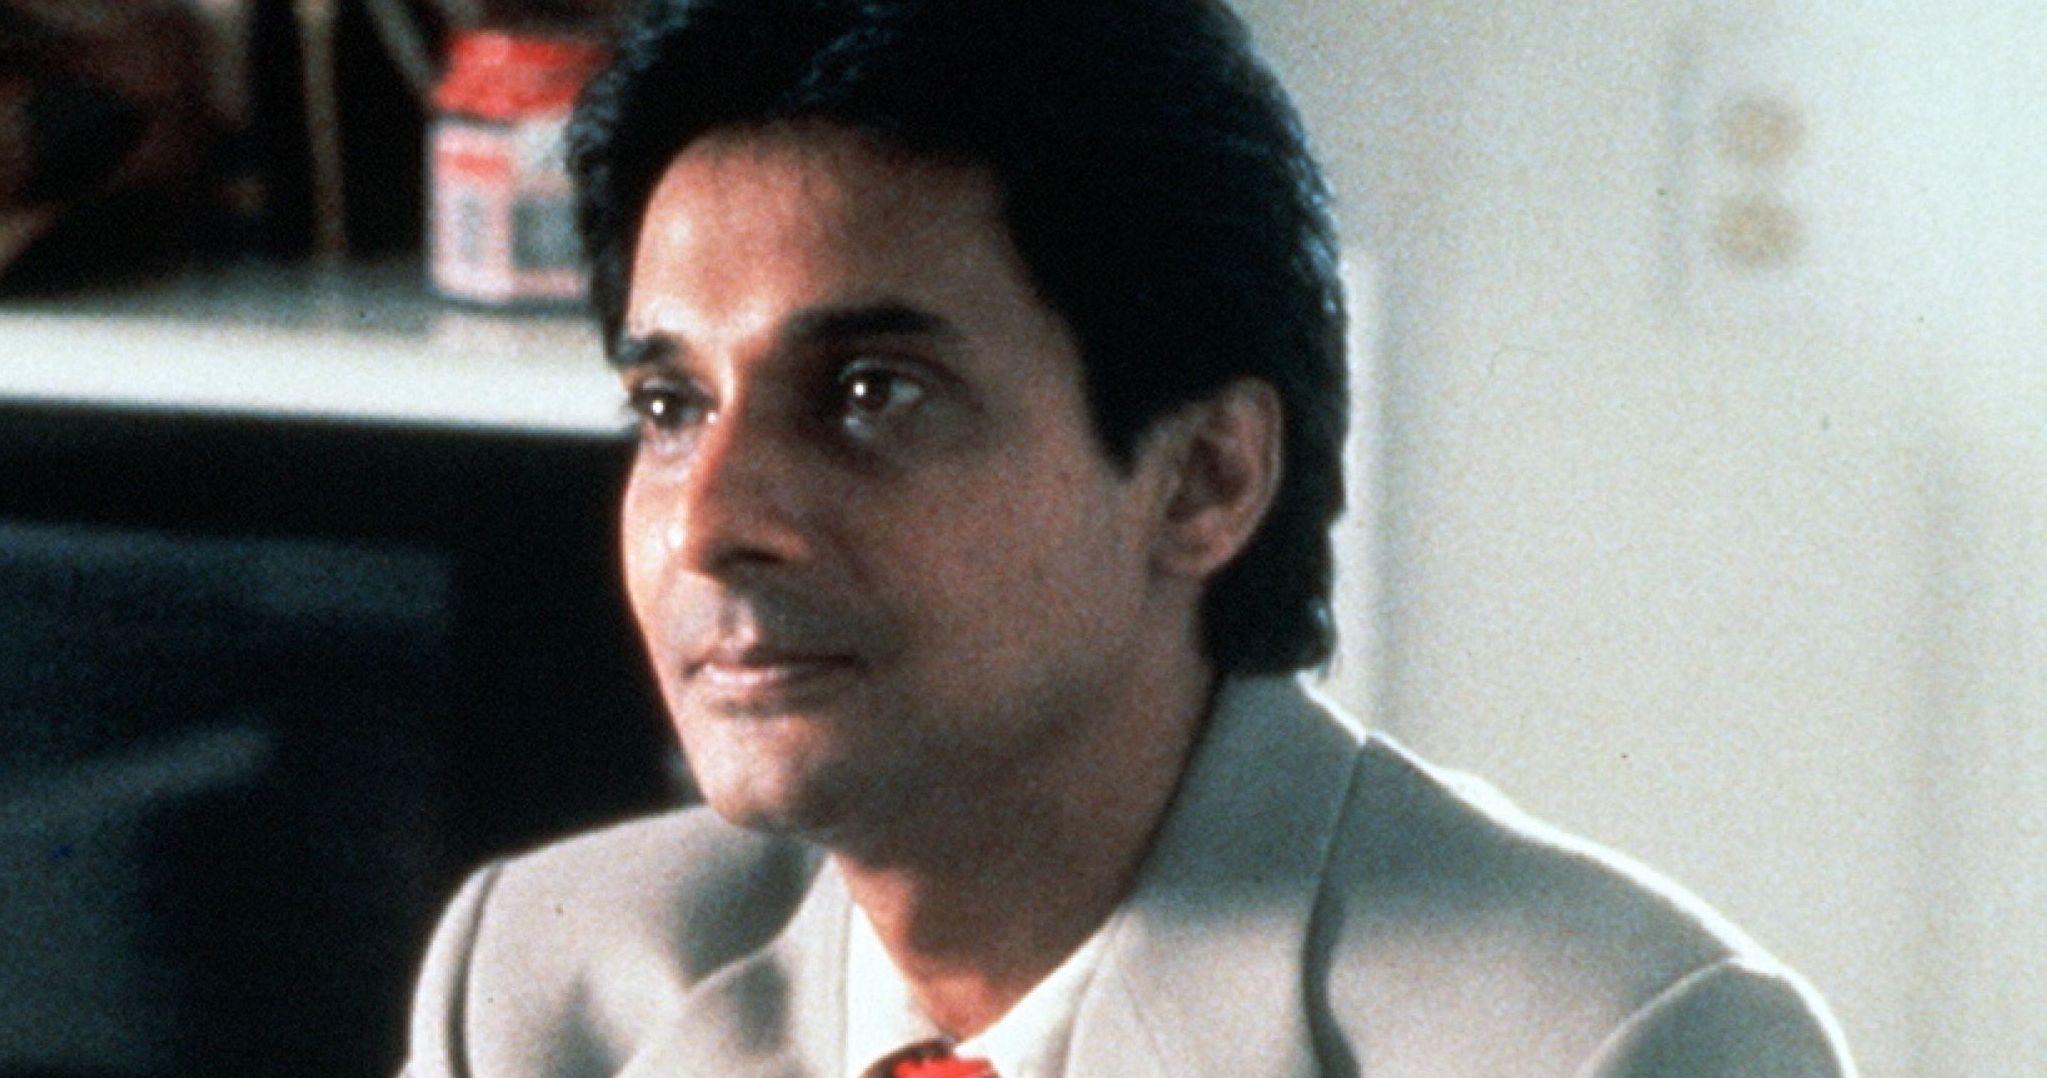 Ranjit Chowdhry Dies Following Surgery, The Office and Prison Break Star Was 64